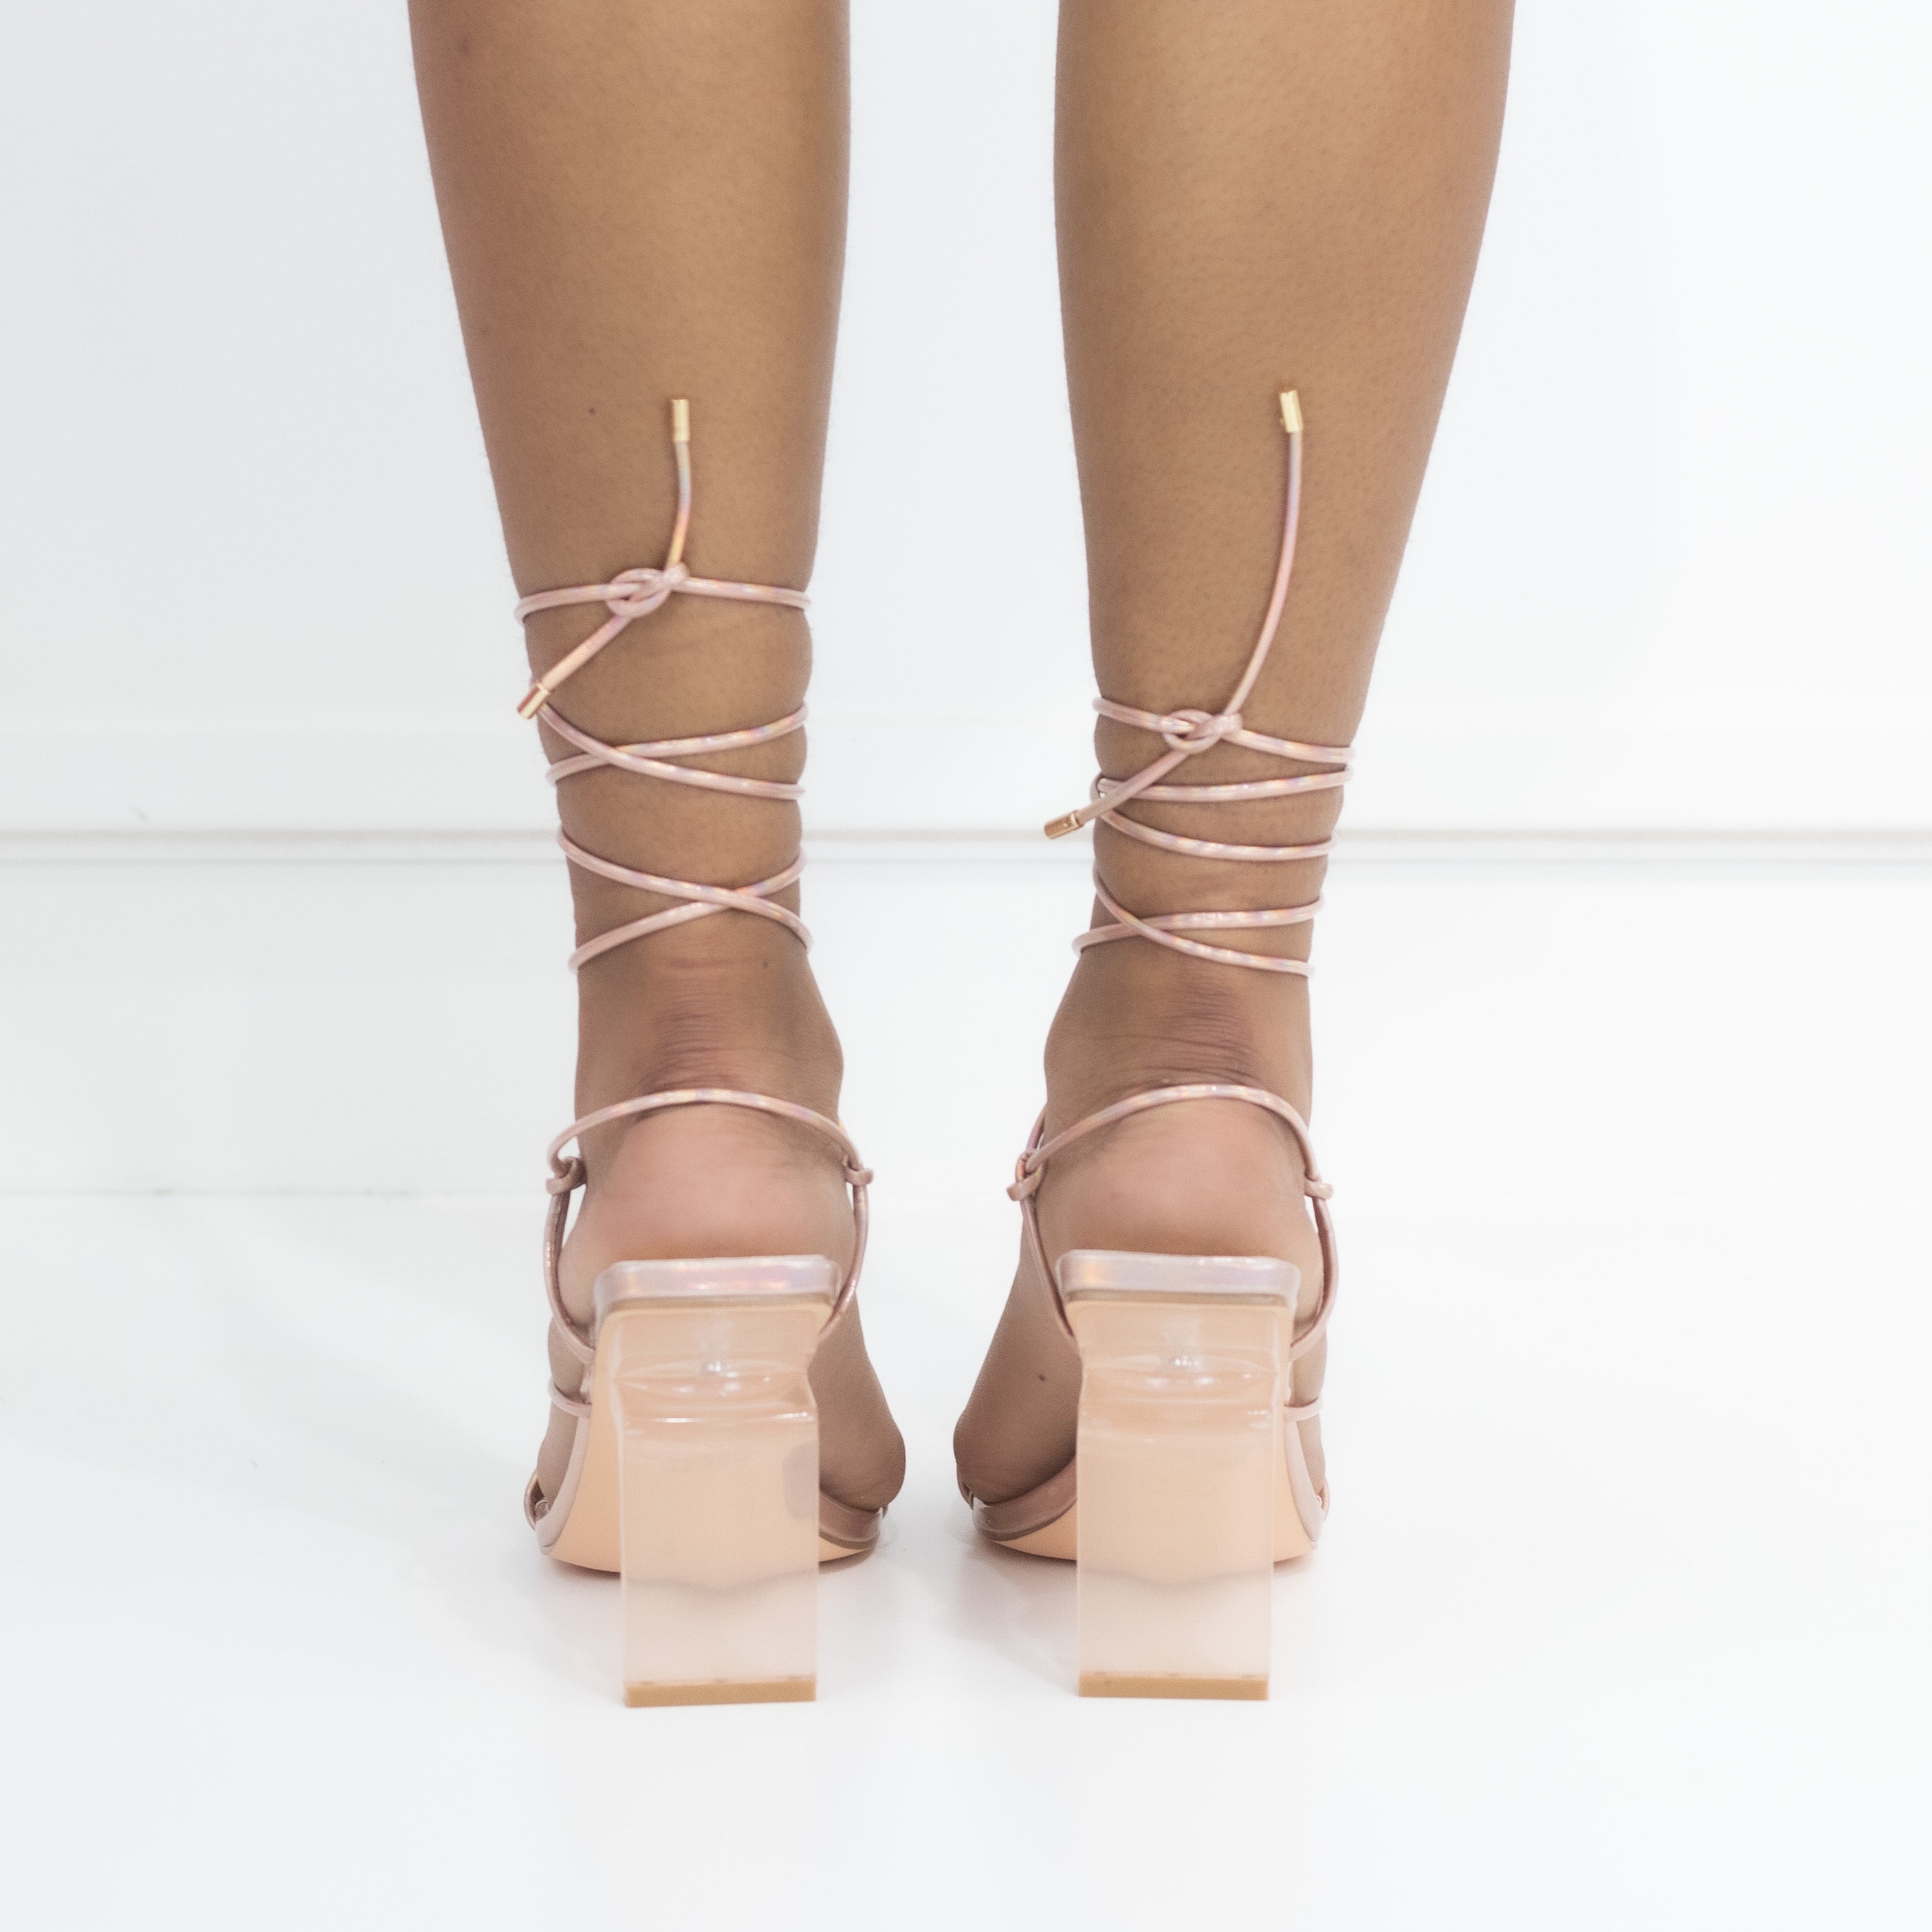 Nadzia strappy sandals on special regt heel rose gold